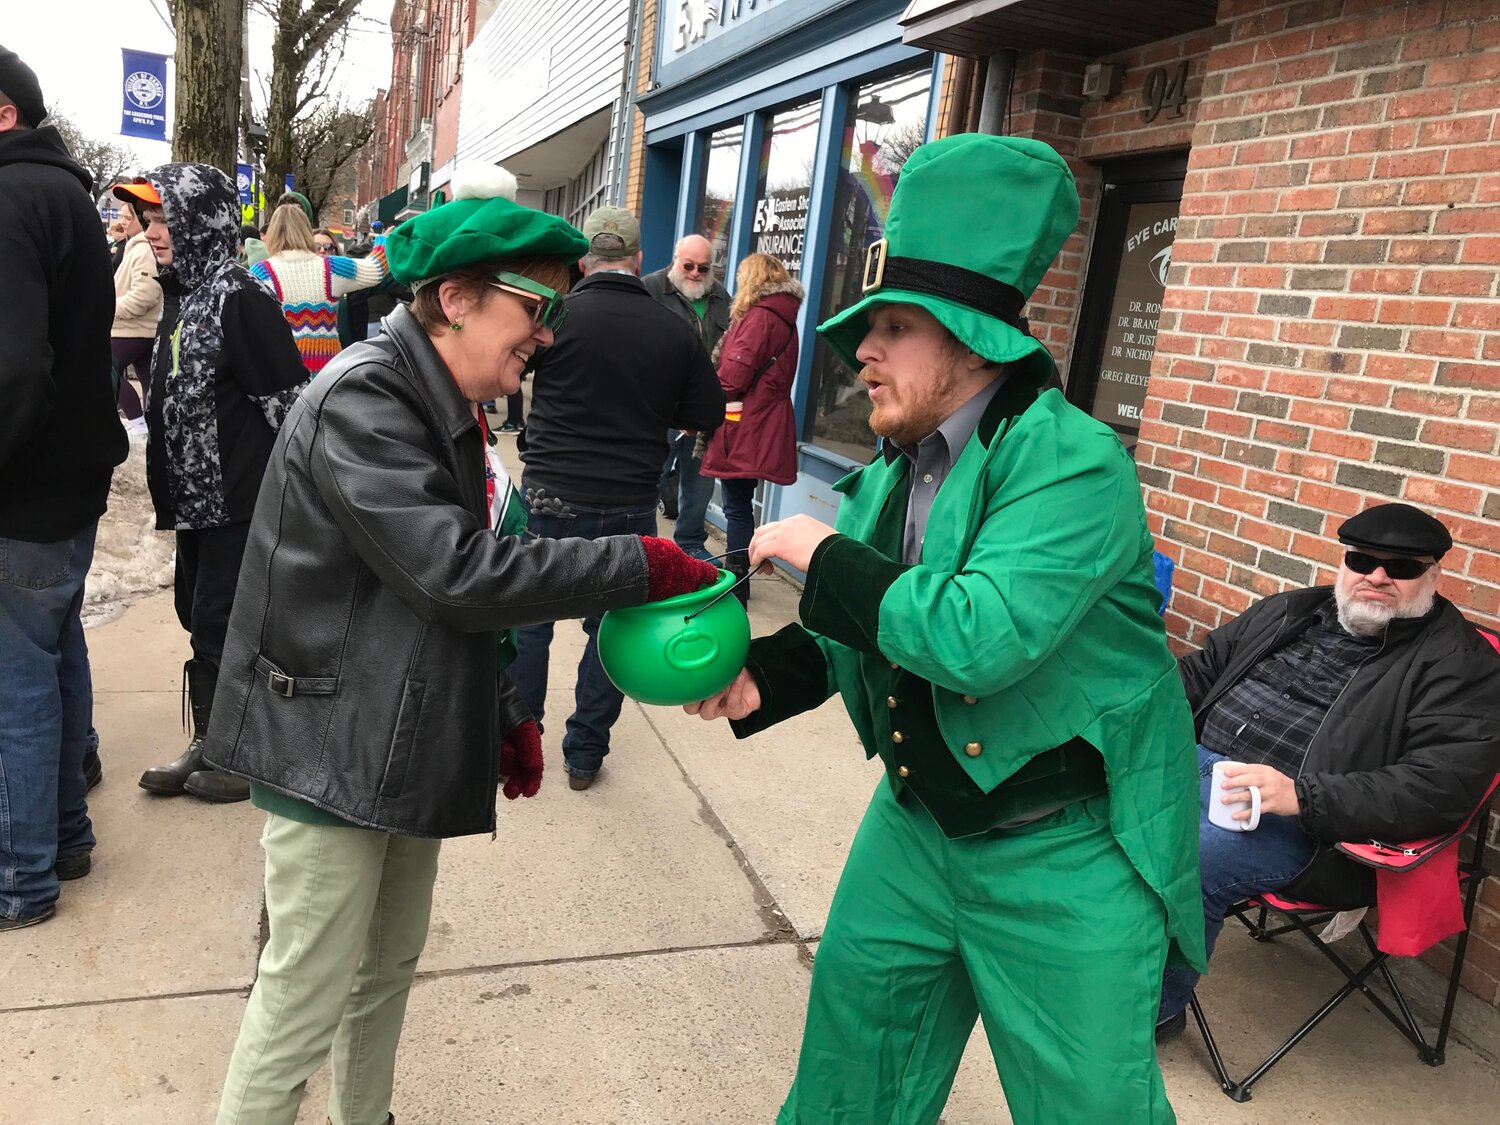 Camden resident Melissa Demeyers, left, reaches into the pot of gold offered by Camden VFW Post 6530 member-turned leprechaun Kris Hummel Saturday, March 18 during the Camden NY Irish Parade.